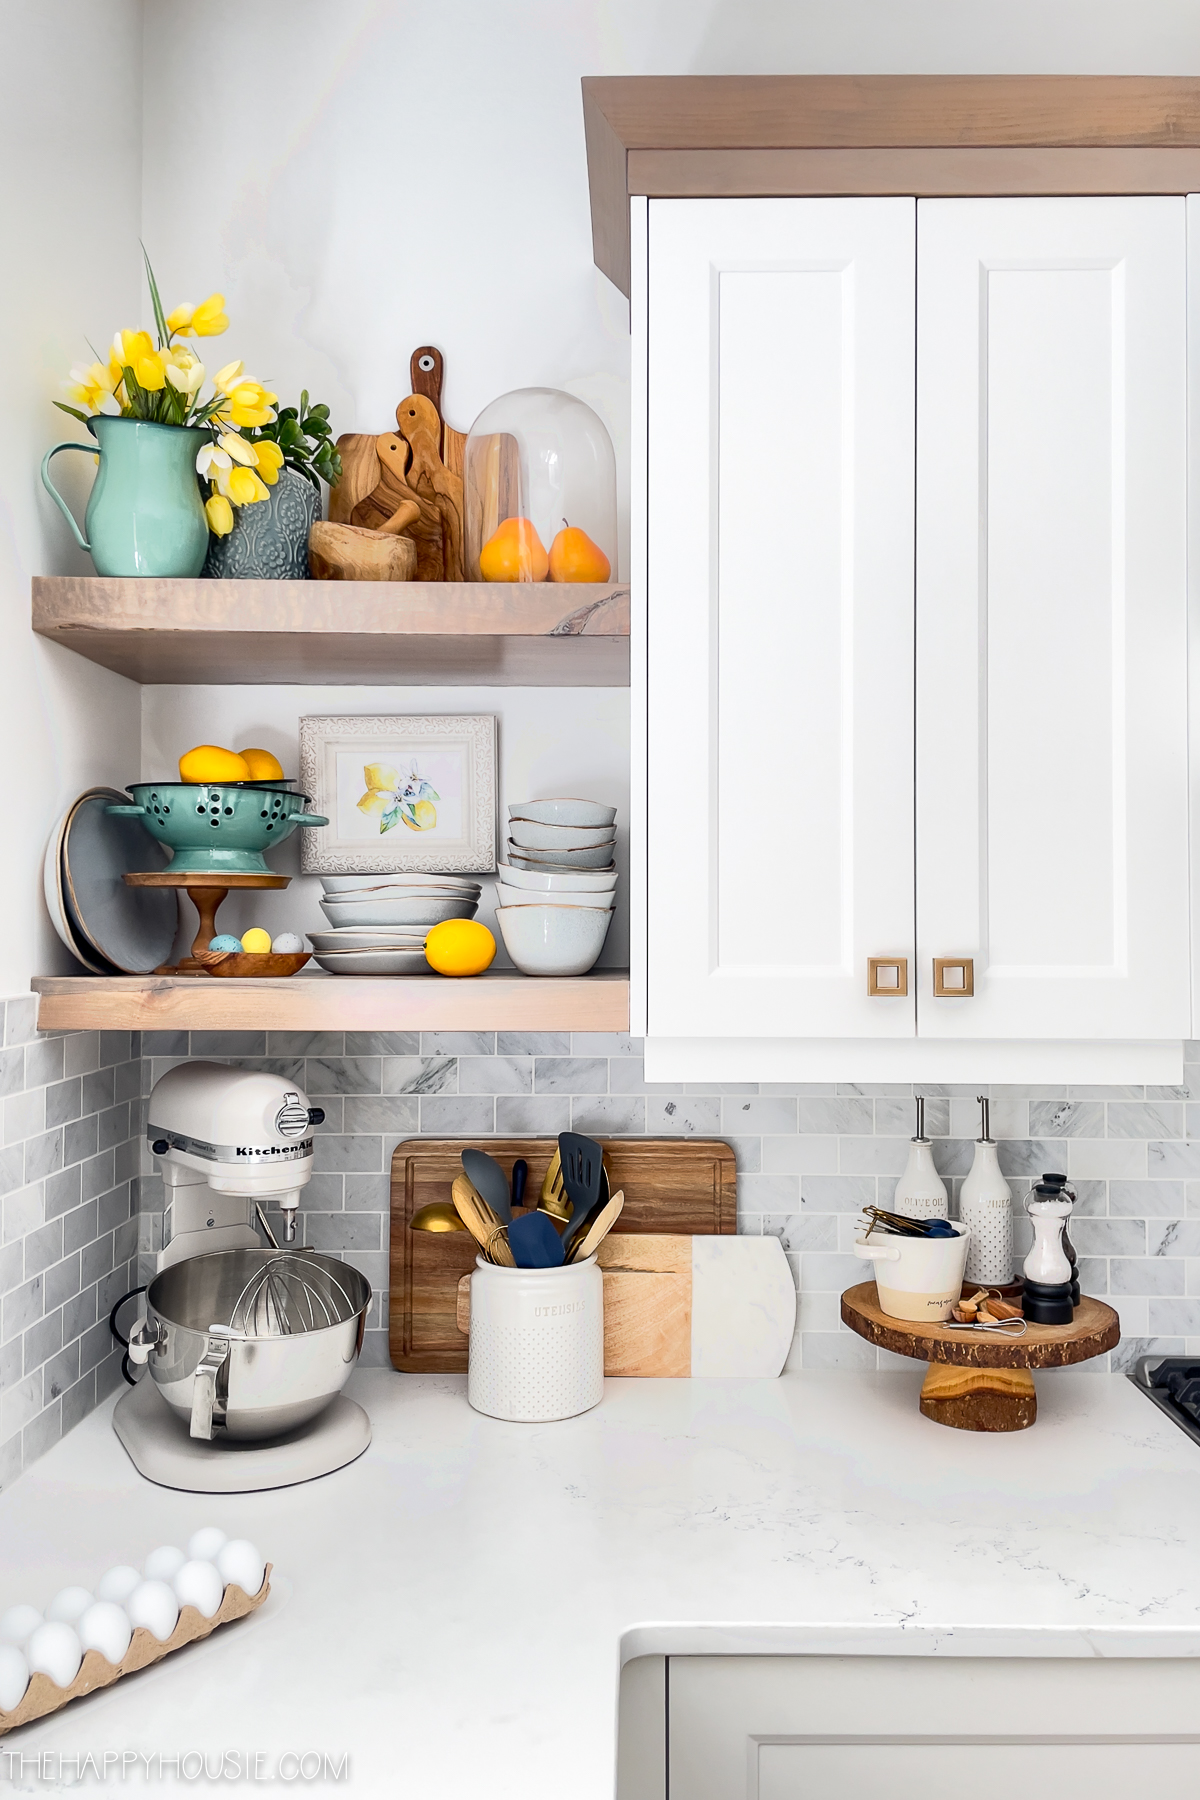 spring kitchen shelves decorated with fresh lemon printables, lemons, and yellow tulips